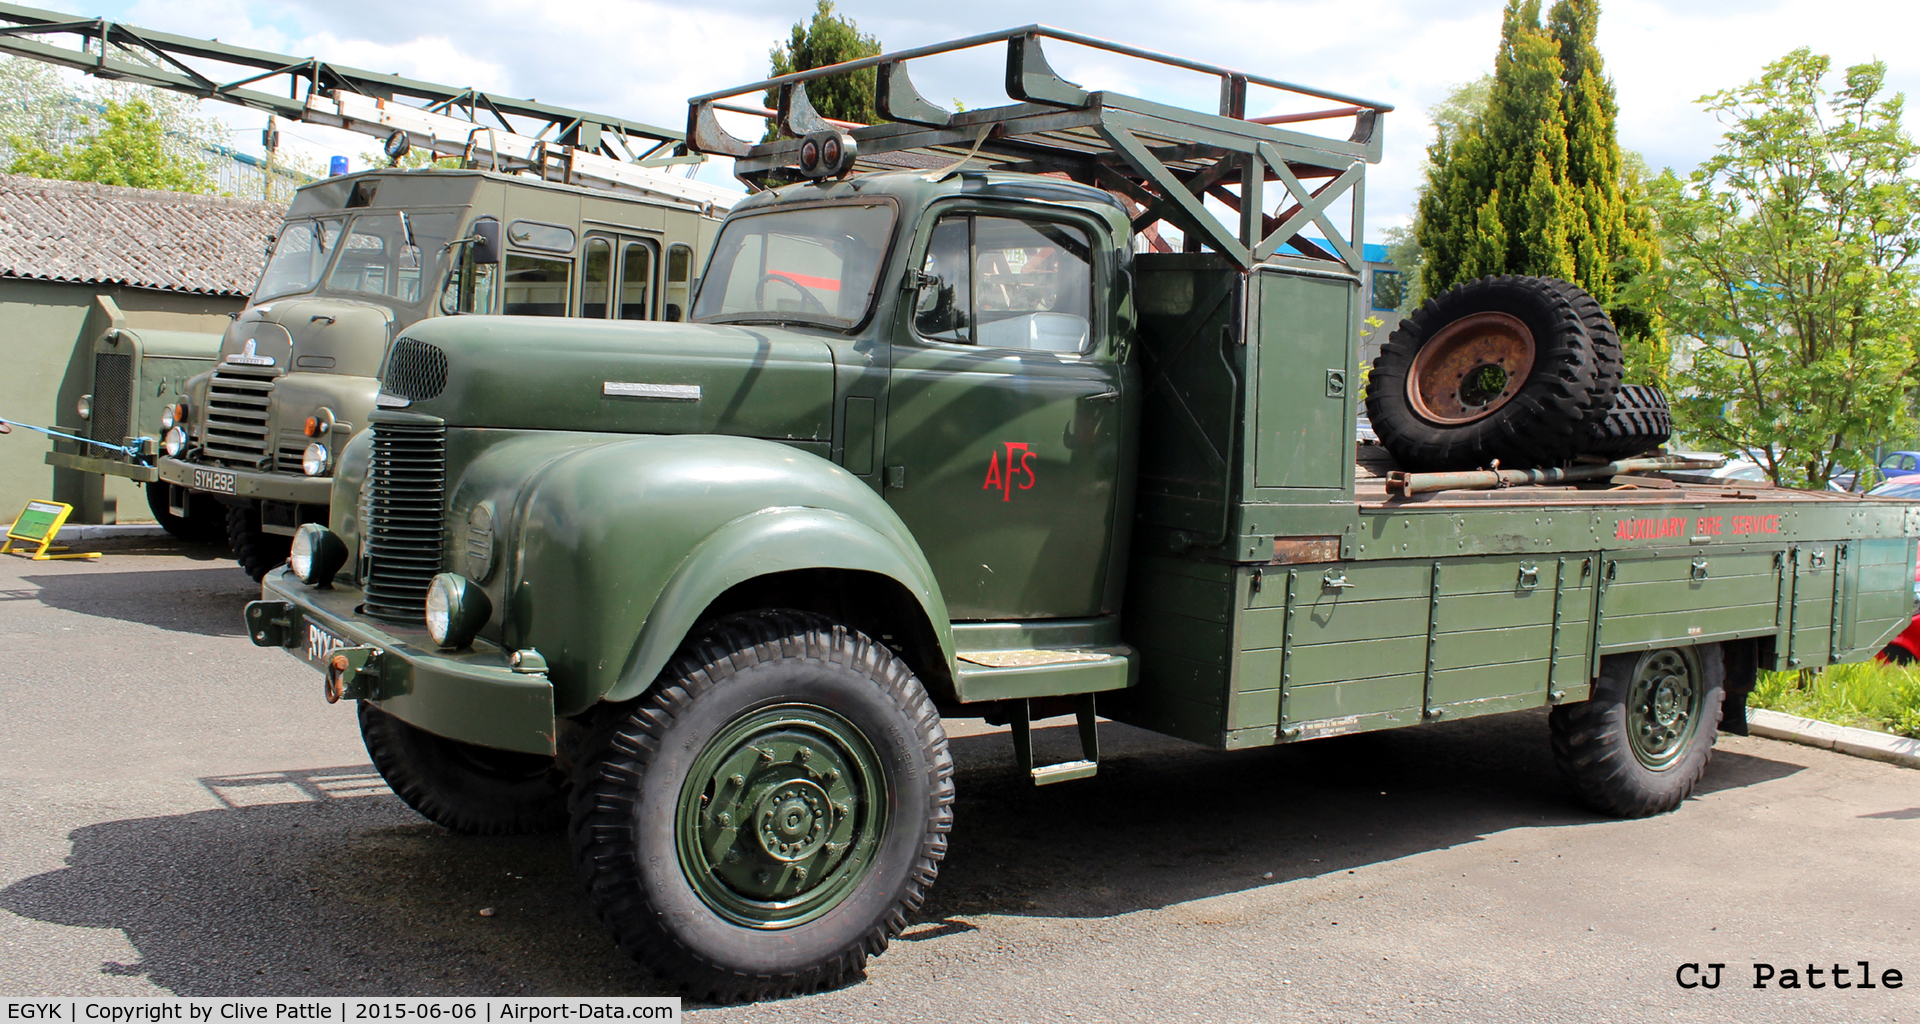 EGYK Airport - Non aircraft - Historical military vehicles on display at the Yorkshire Air Museum, Elvington, EGYK